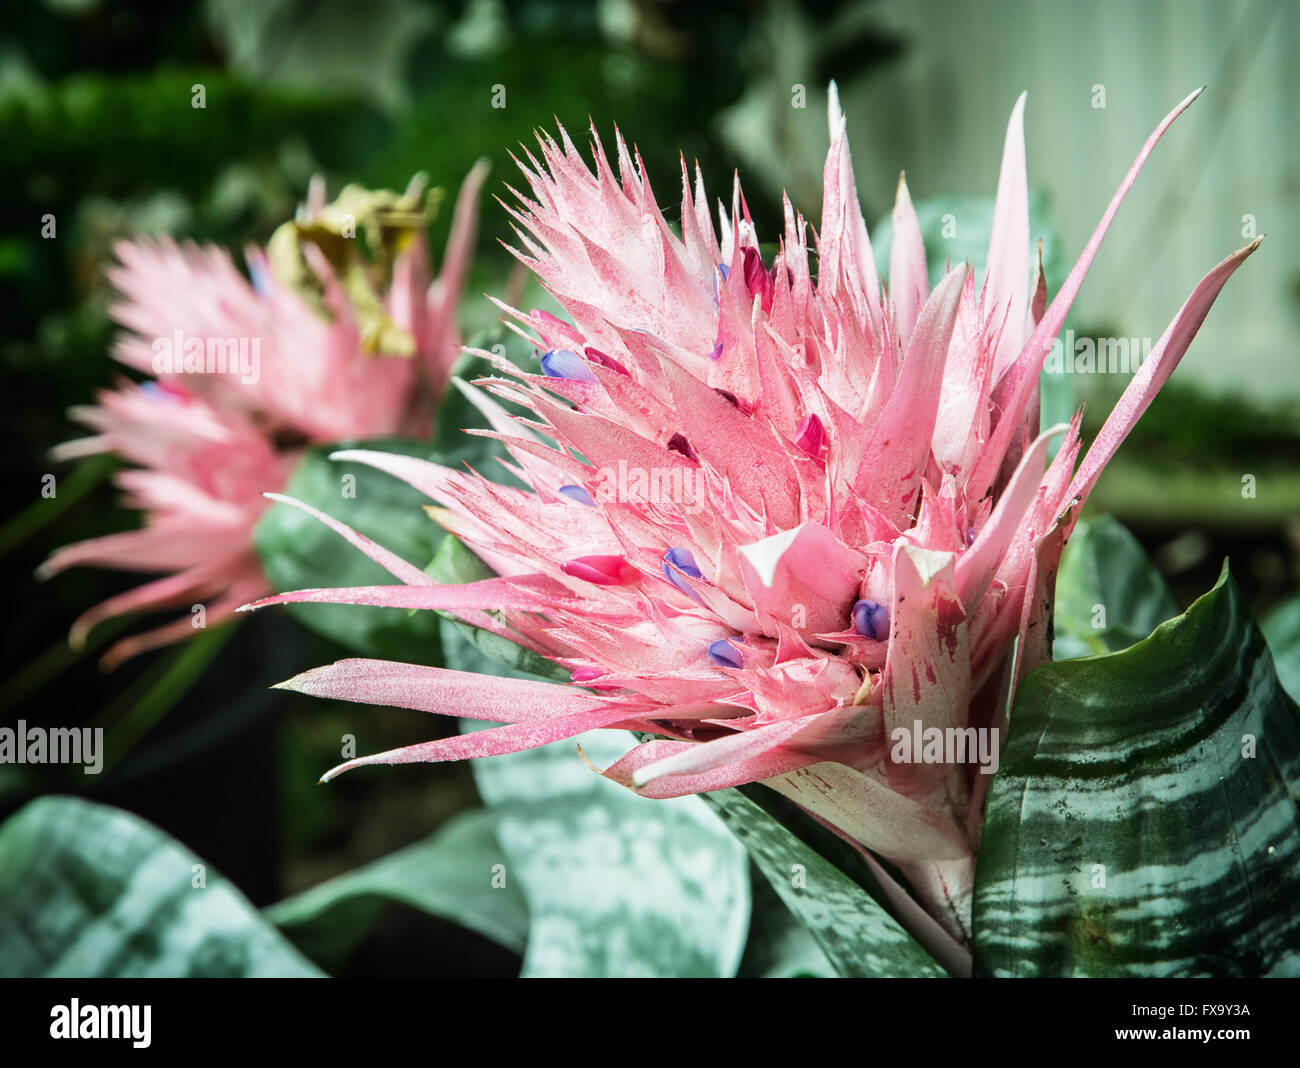 Aechmea fasciata - Silver vase or Urn plant - is a species of flowering plant in the bromeliad family, native to Brazil. Natural Stock Photo